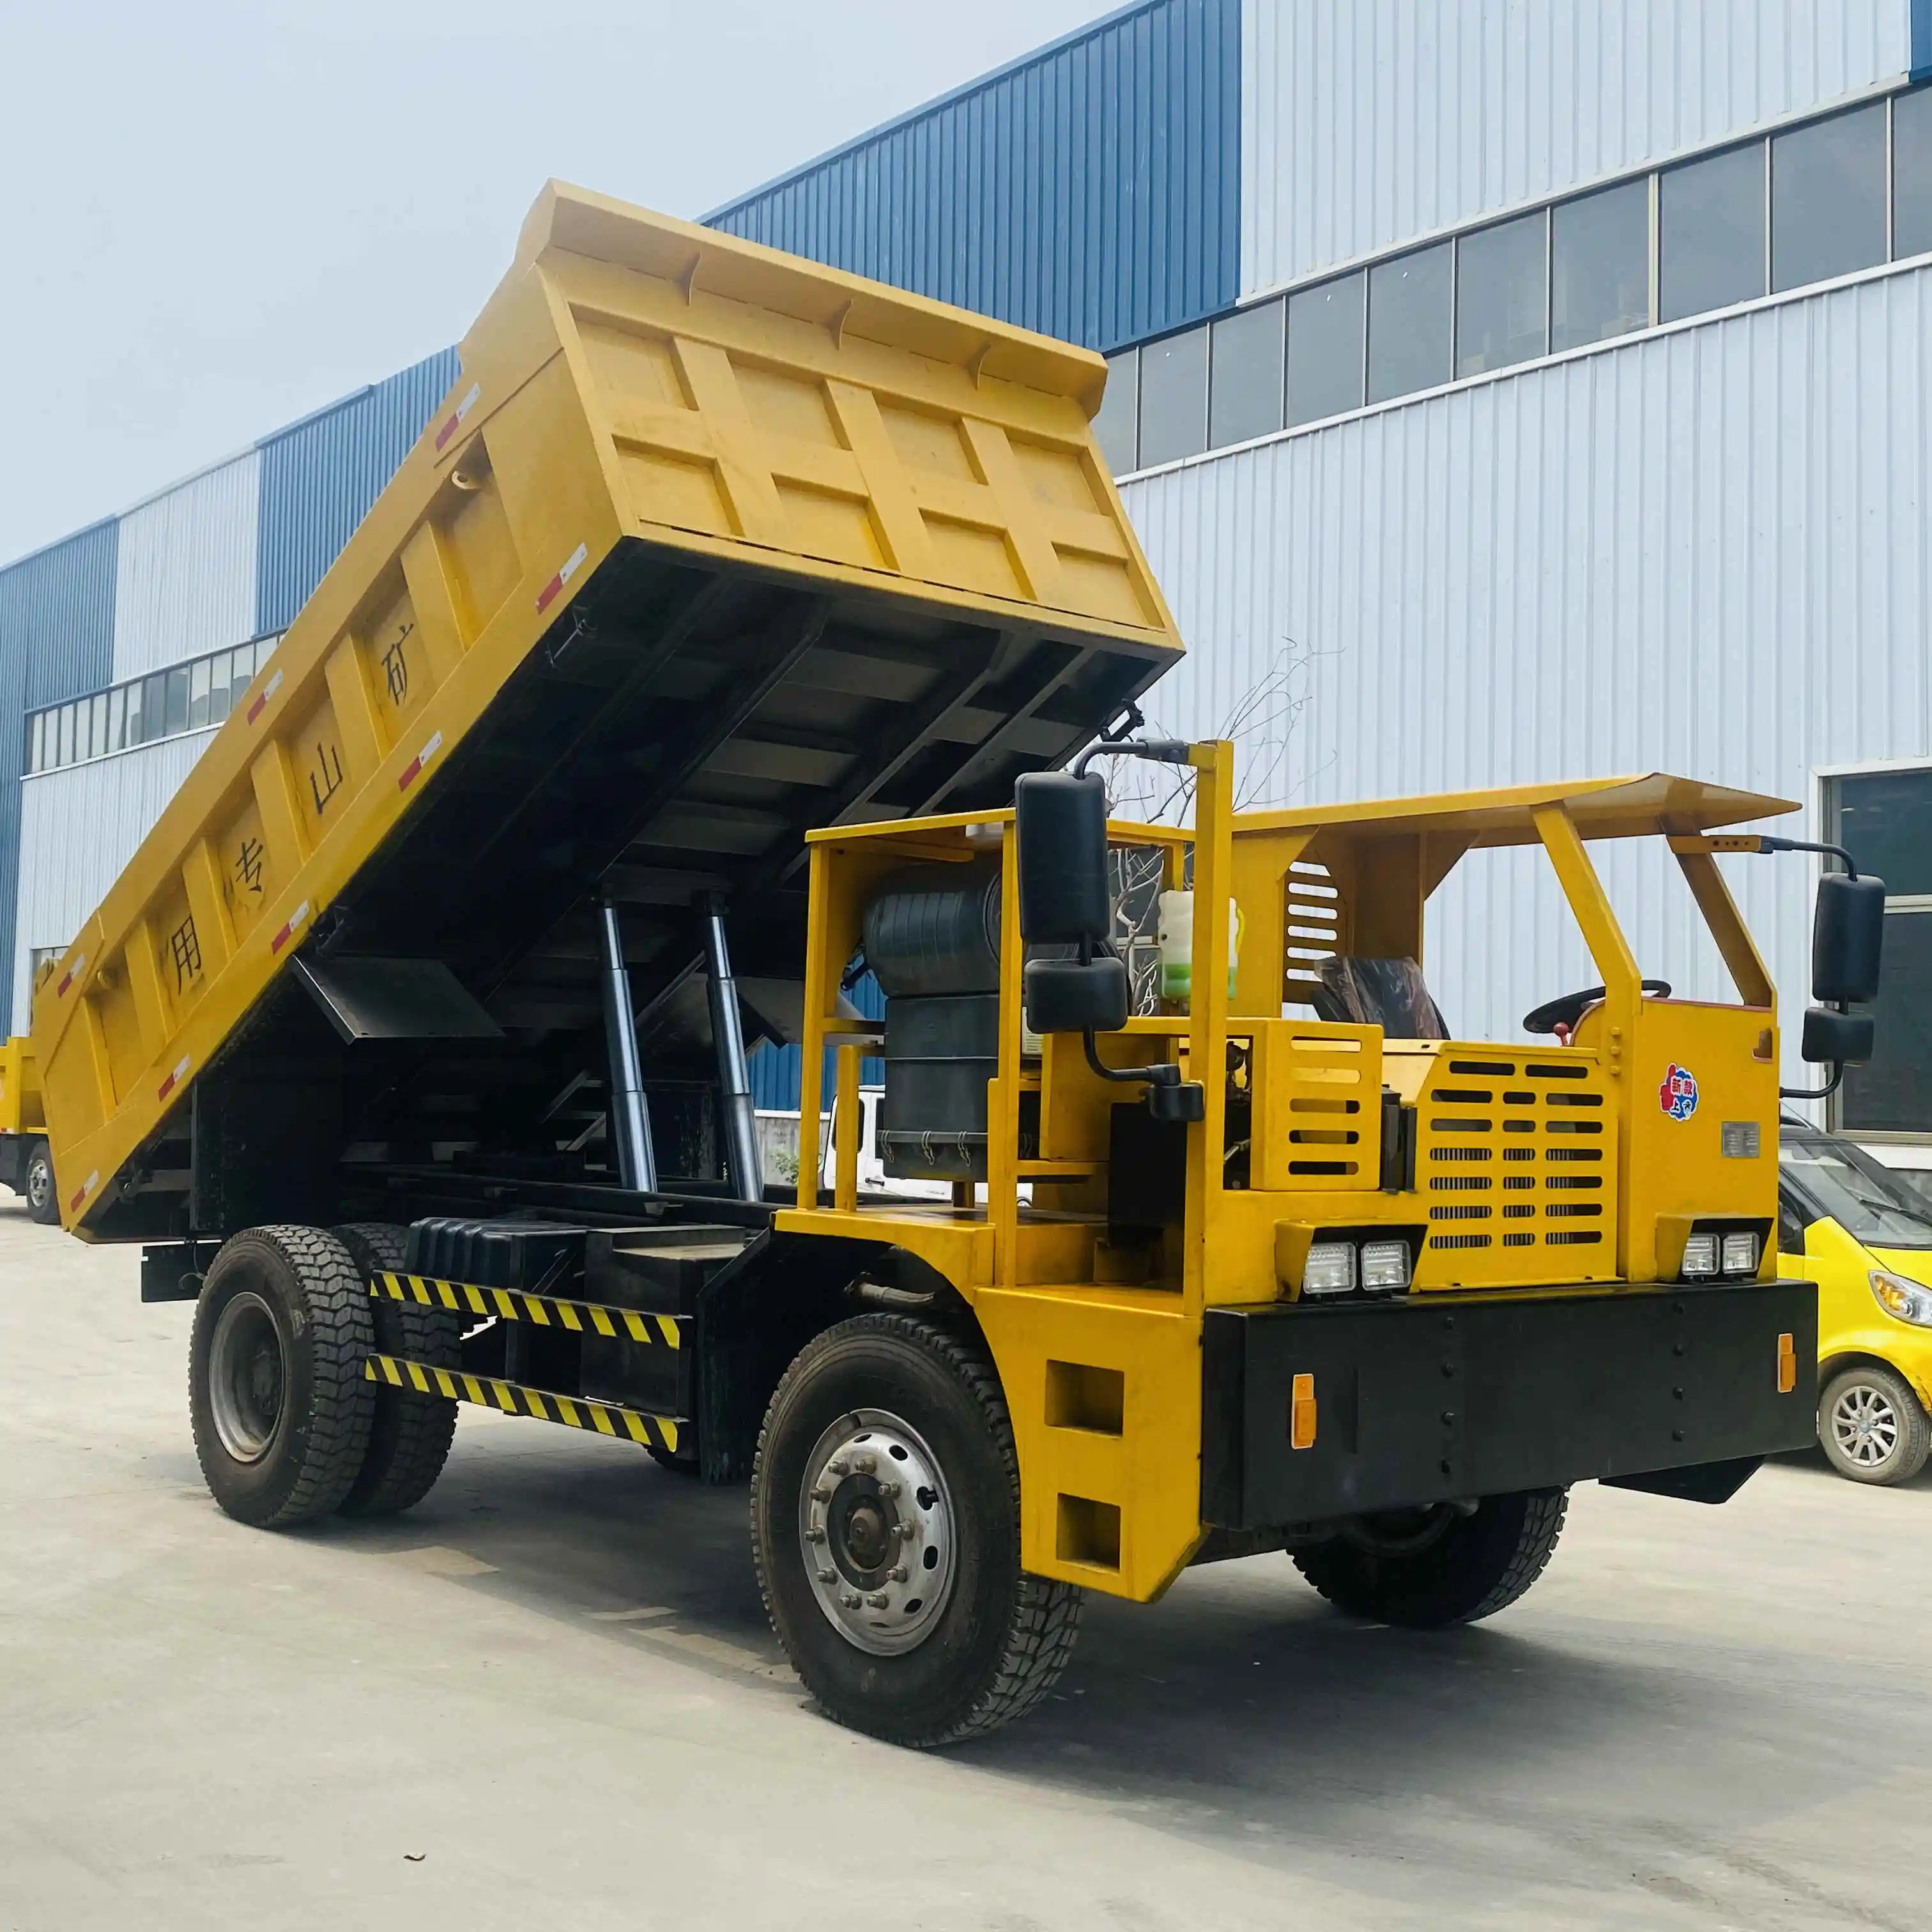 CAPAI VNew high-end listed fixed mining railway carriage wheeled mining vehicle mine dump truck IN STOCK FOR SALE